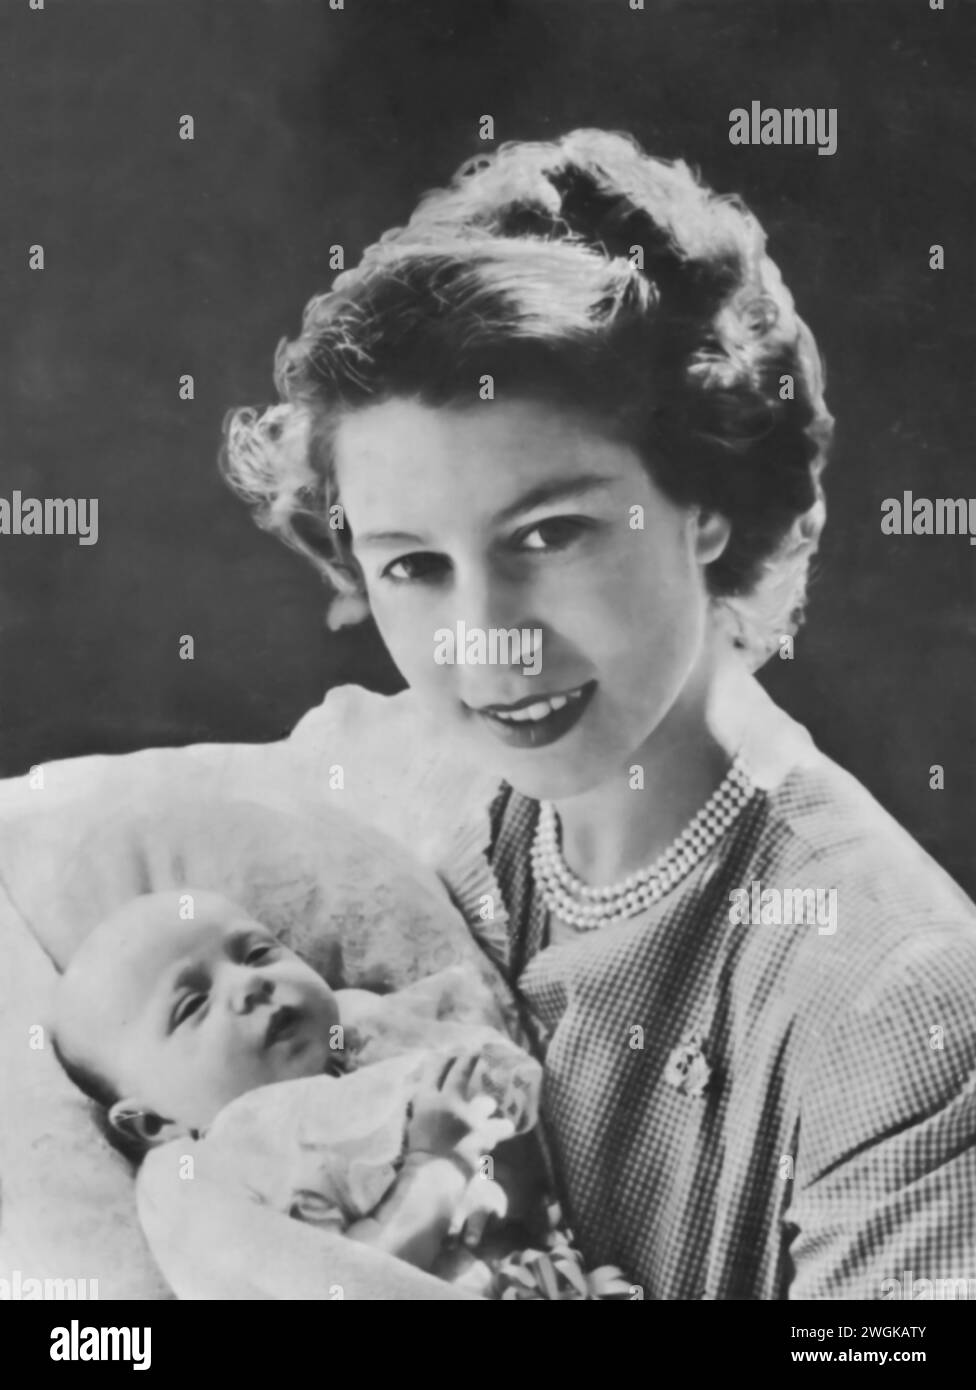 Portrait of Elizabeth II holding her newborn daughter, Princess Anne, in 1950. Born on August 15, 1950, this image offers a glimpse into the family life of Elizabeth, at a time just before her ascension to the British throne in 1952. Stock Photo